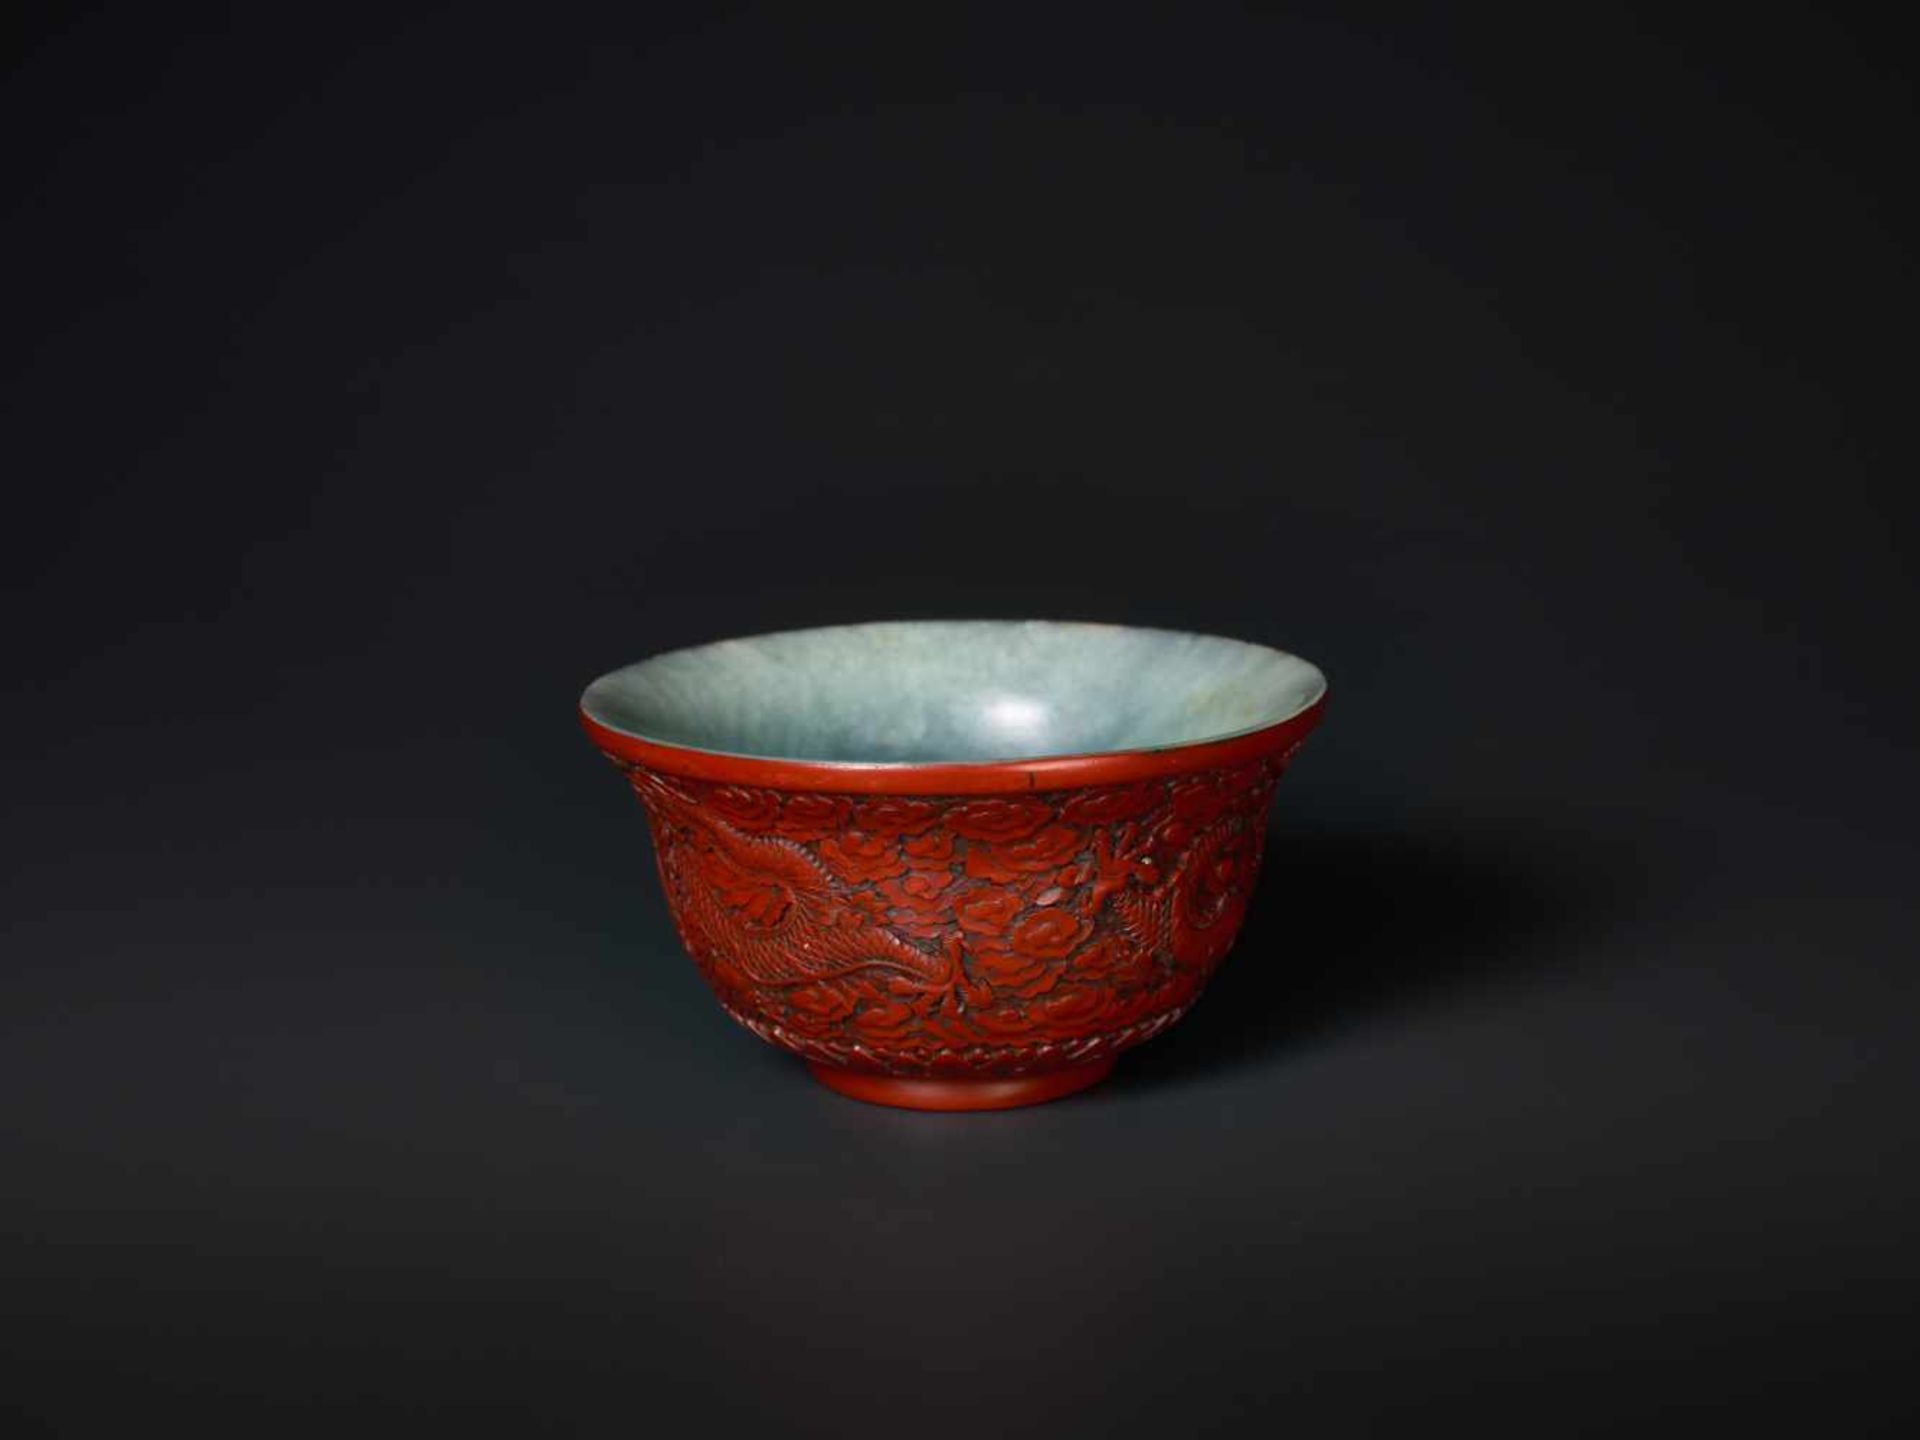 AN EXTREMELY RARE QIANLONG PERIOD CINNABAR LACQUER EMBELLISHED JADE BOWL Celadon and grey streaked - Image 5 of 7